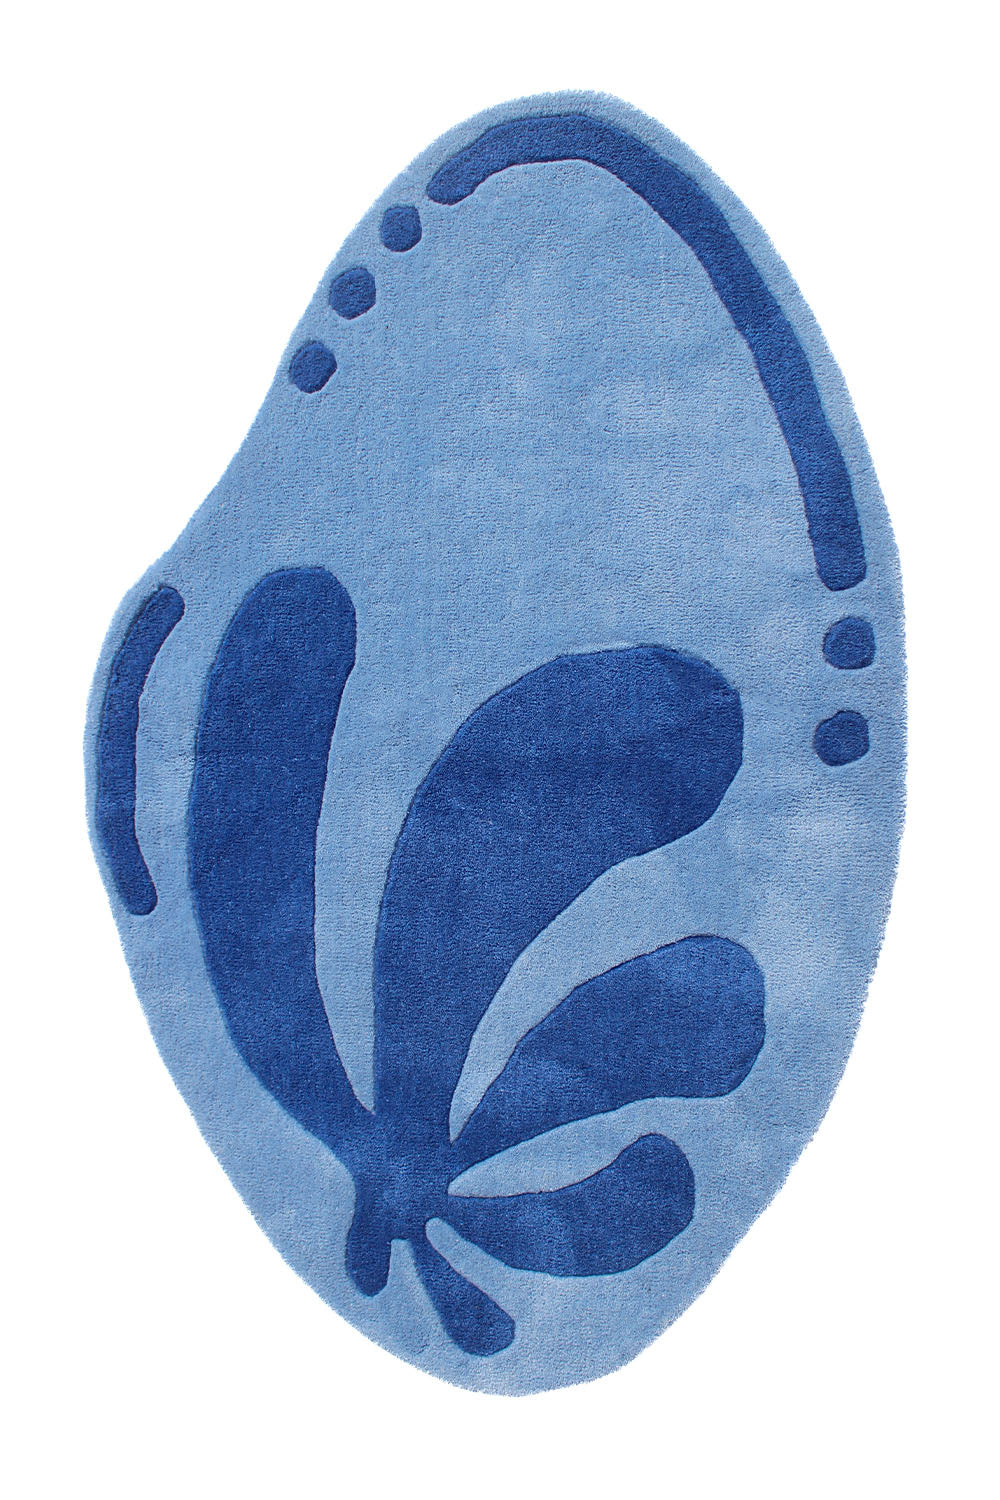 Floral Lagoon Hand Tufted Wool Rug in Blue by Jubi